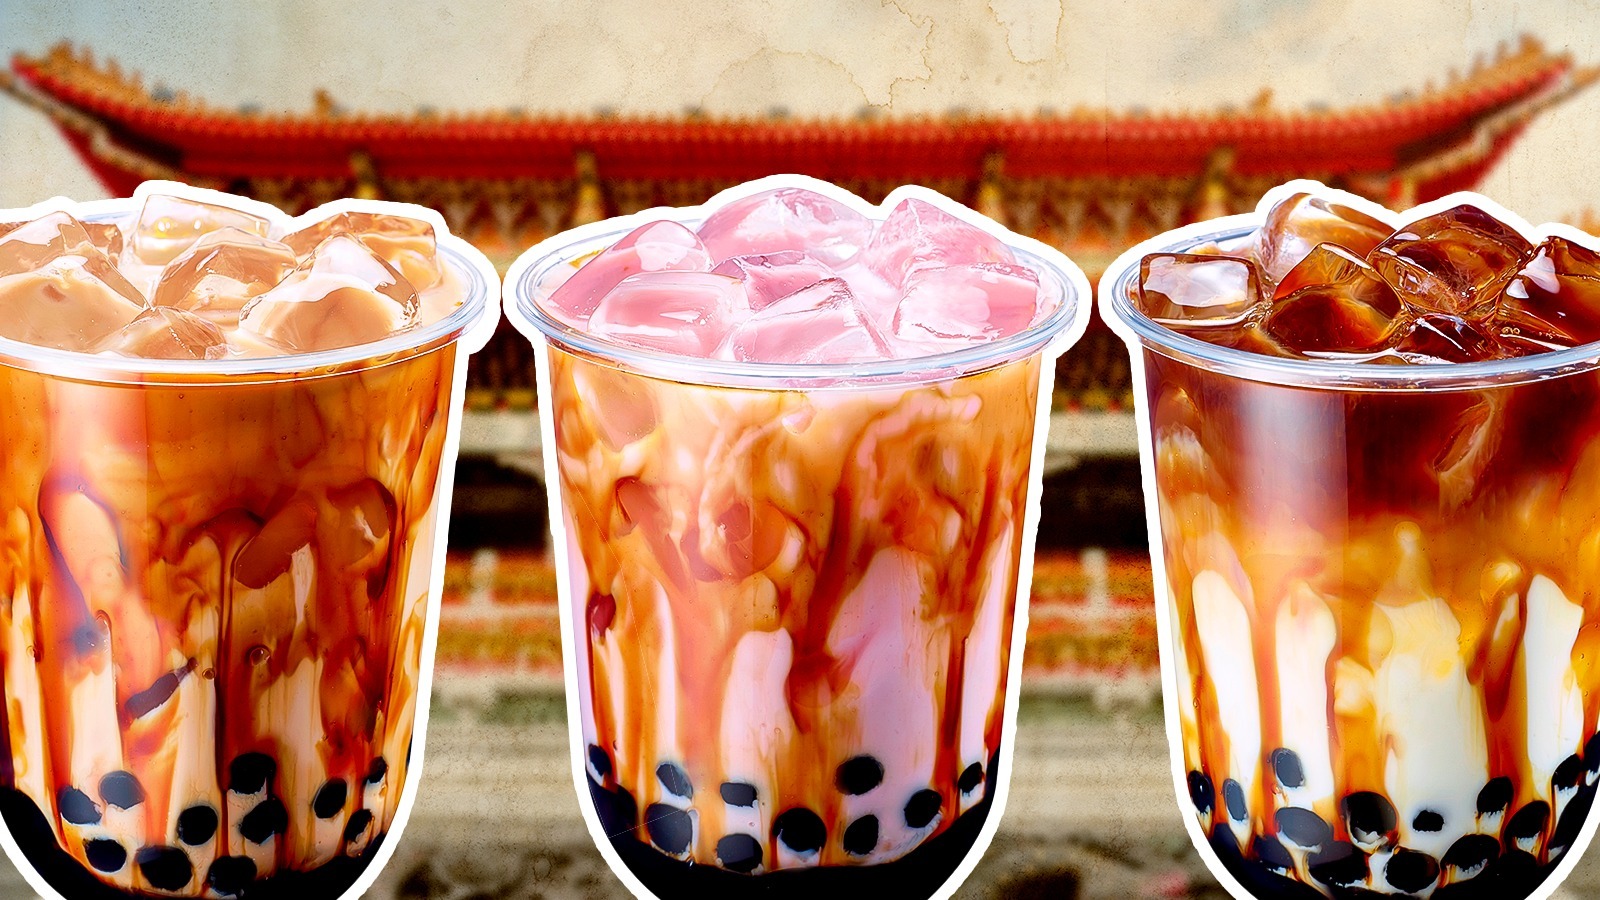 https://www.thedailymeal.com/img/gallery/the-origins-of-bubble-tea-are-steeped-in-mystery/l-intro-1684749069.jpg